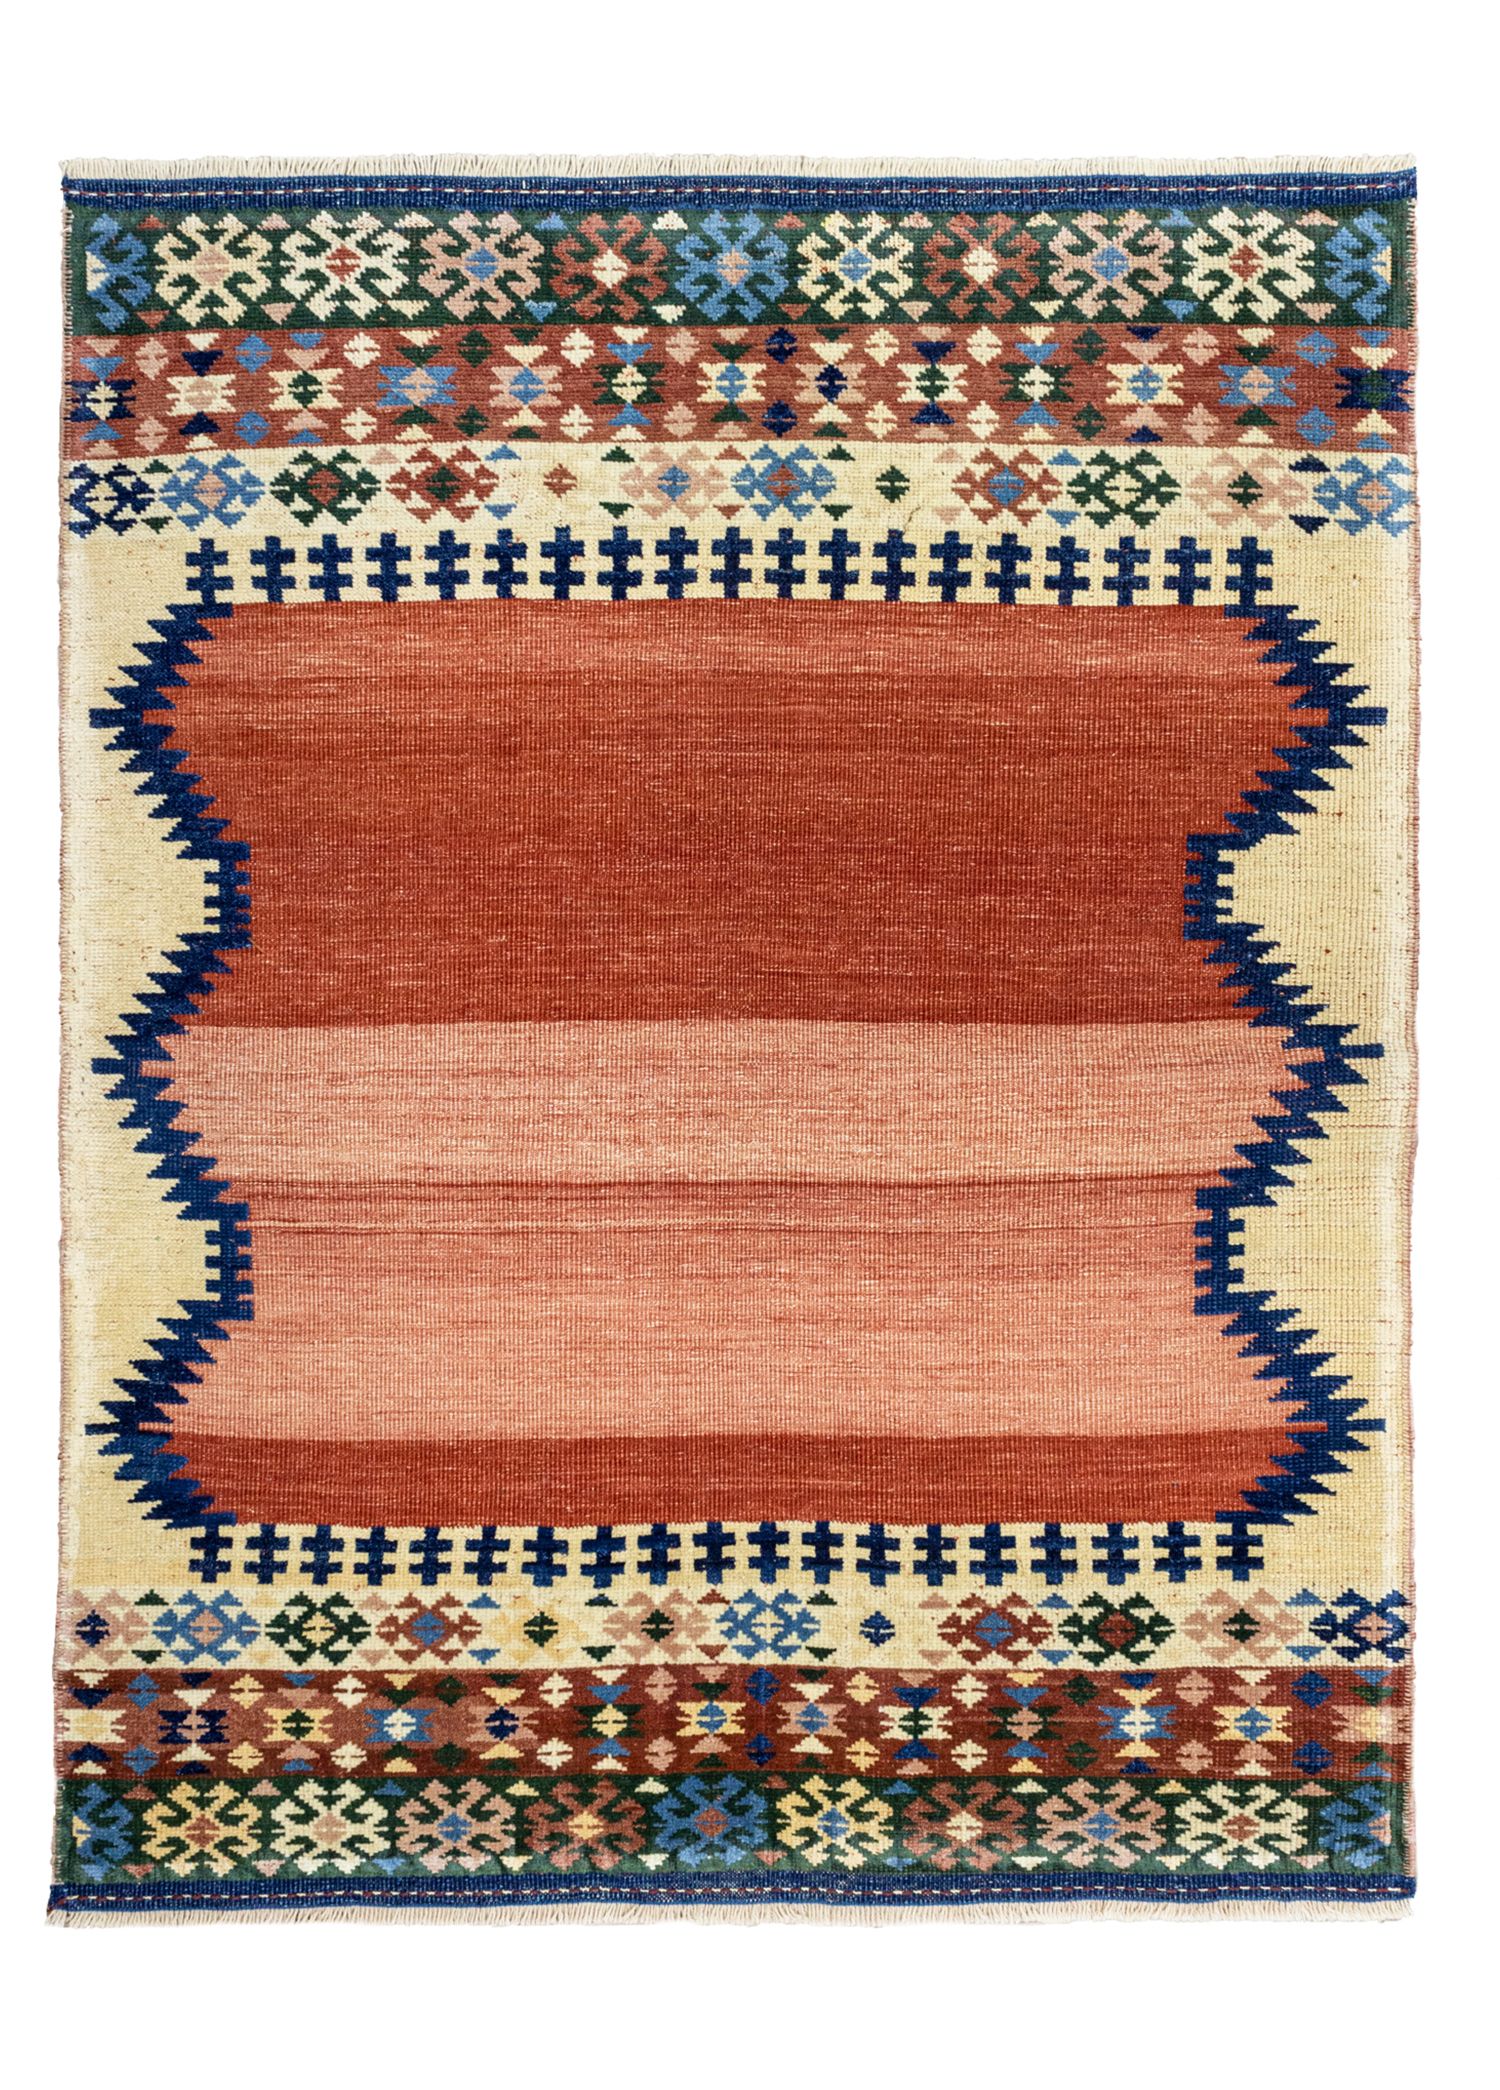 Dalen Ethnic Patterned Hand Woven Wool Carpet Rug 110x142 cm